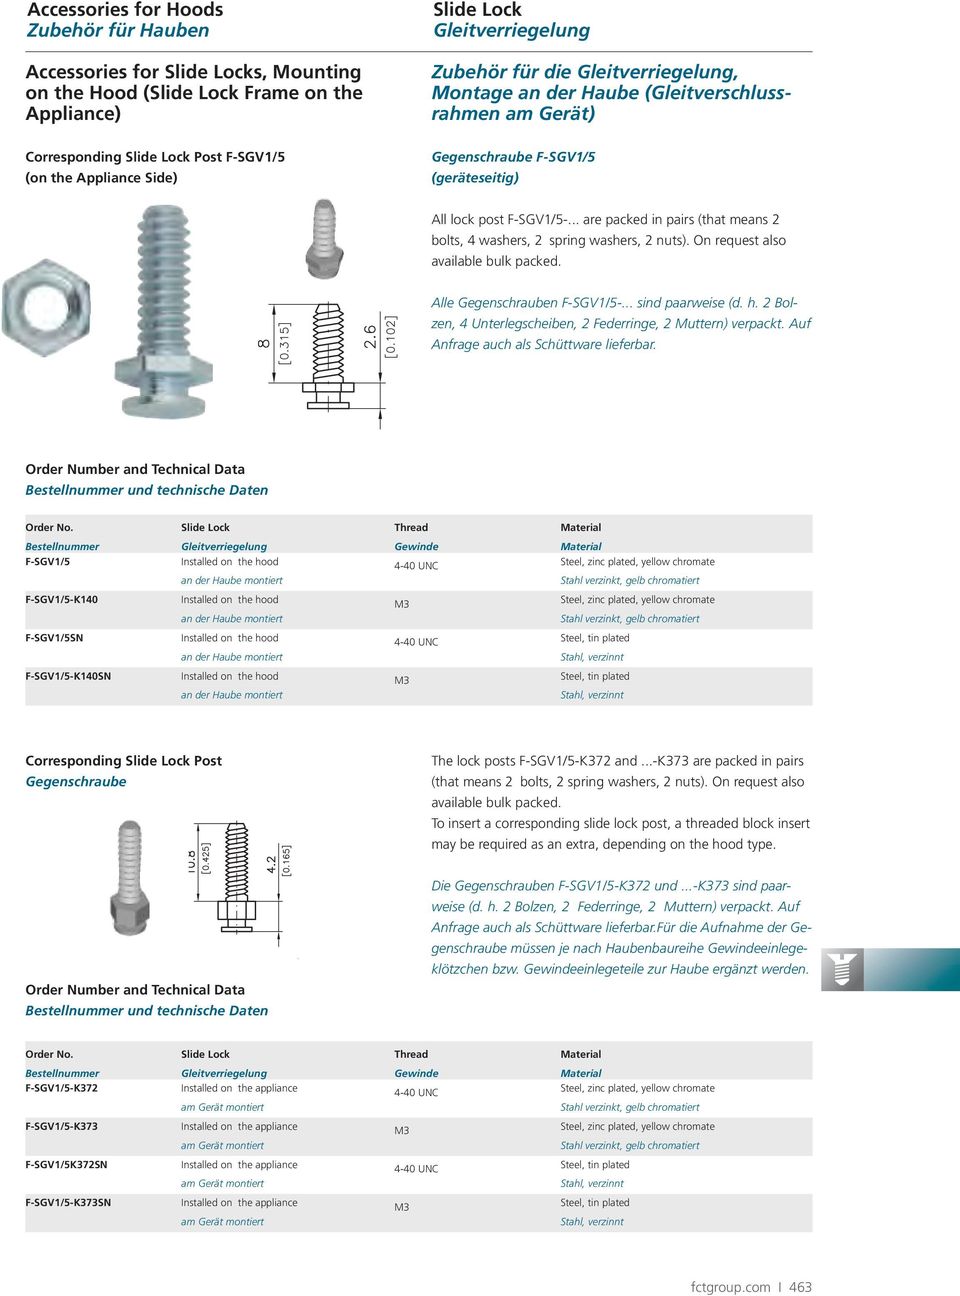 .. are packed in pairs (that means bolts, 4 washers, spring washers, nuts). On request also available bulk packed. Alle Gegenschrauben F-SGV1/5-... sind paarweise (d. h.